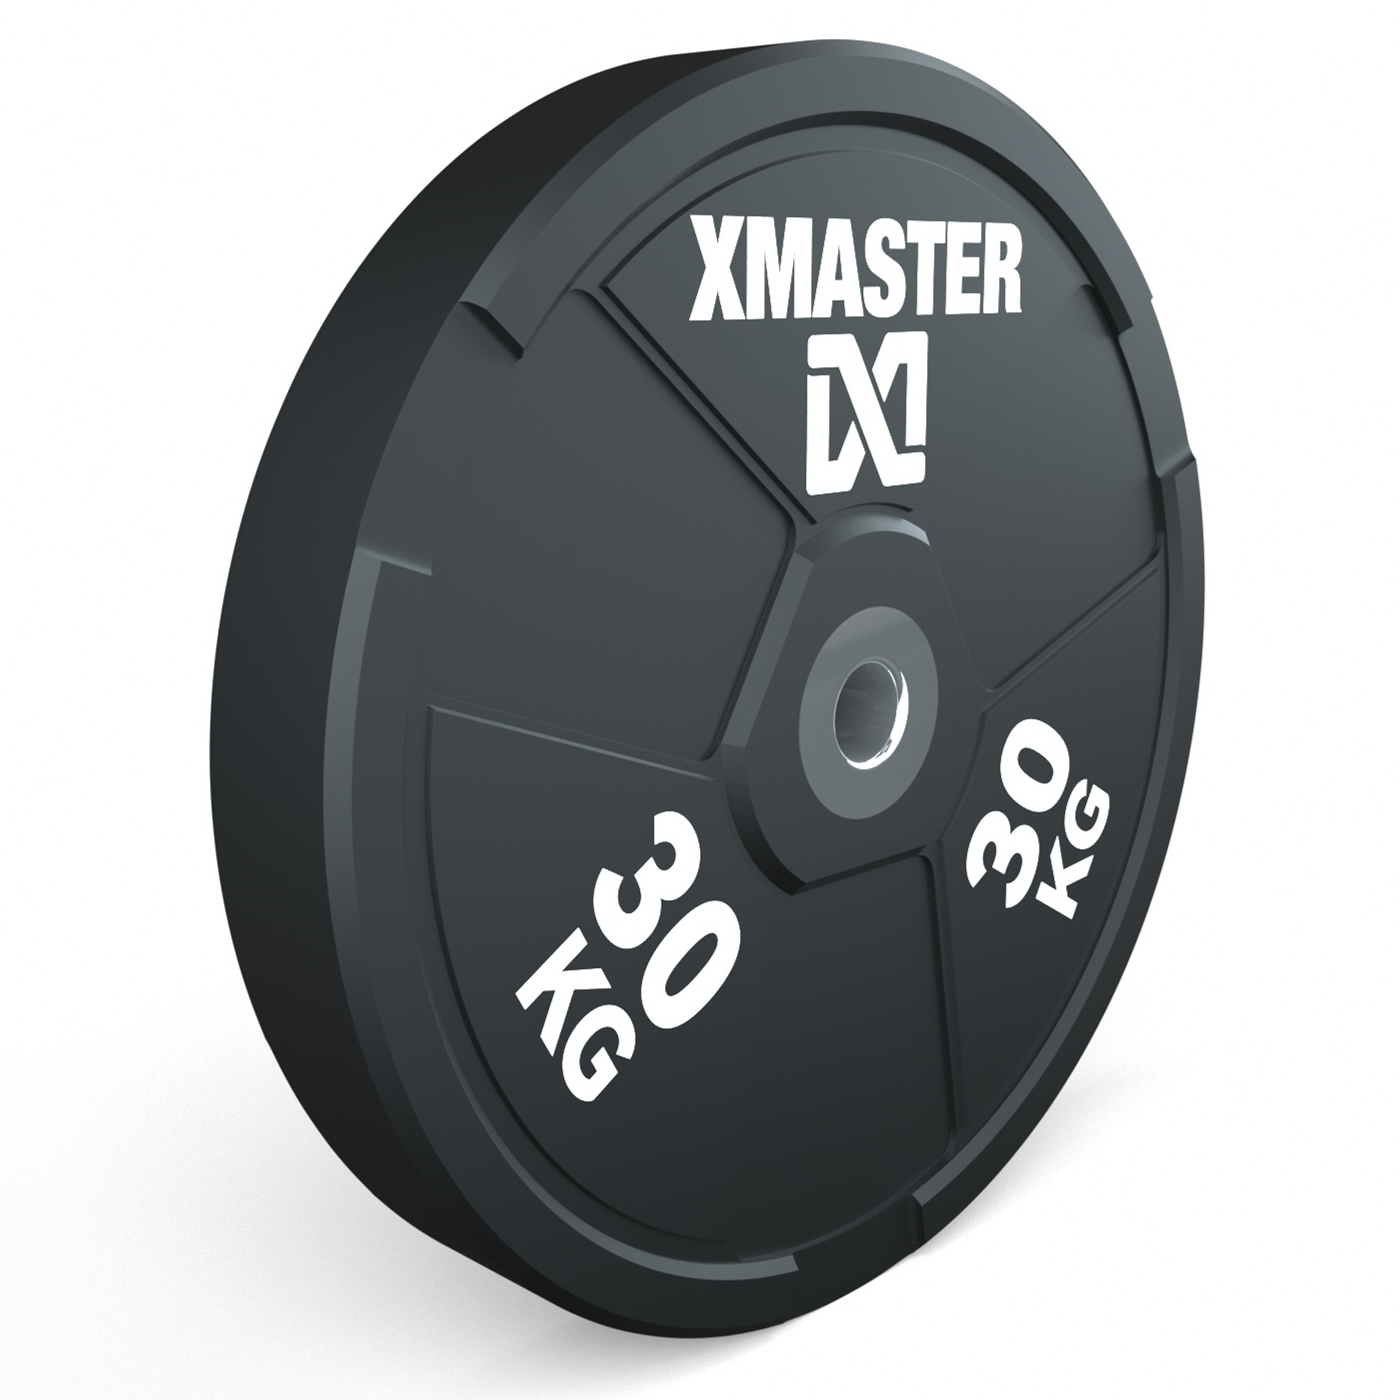 2022 High quality Elite Bumper Plate - Xmaster 660 Dragon Strongman Plate – XMASTER